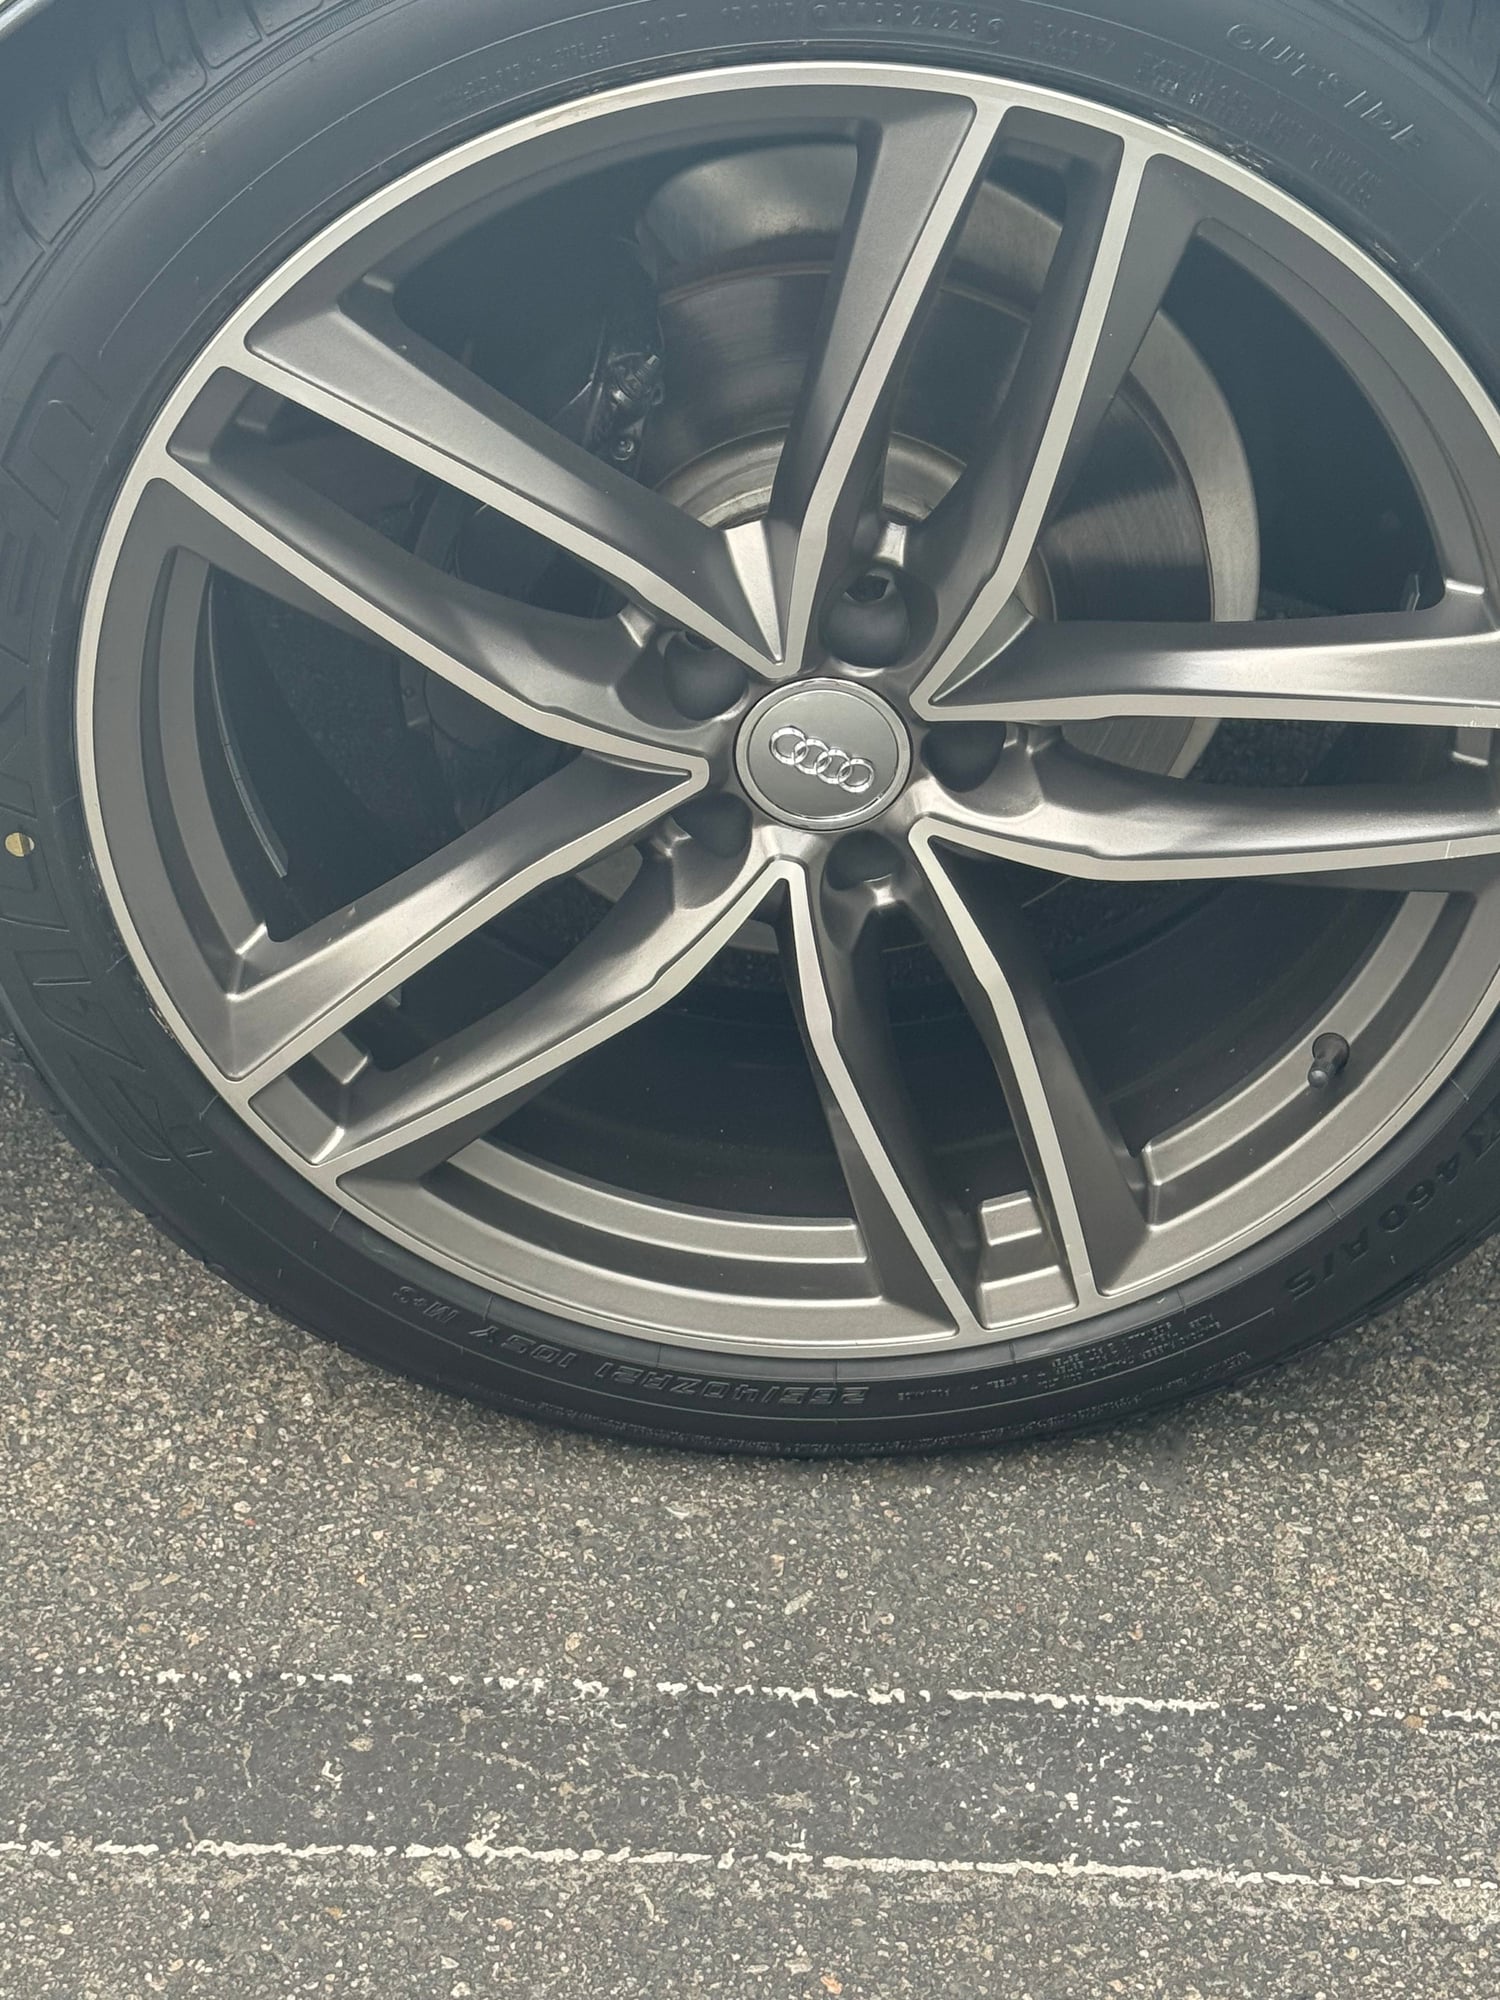 Wheels and Tires/Axles - 21x9 et30 Audi Q7 style wheels - New - 0  All Models - Riverside, CA 92503, United States